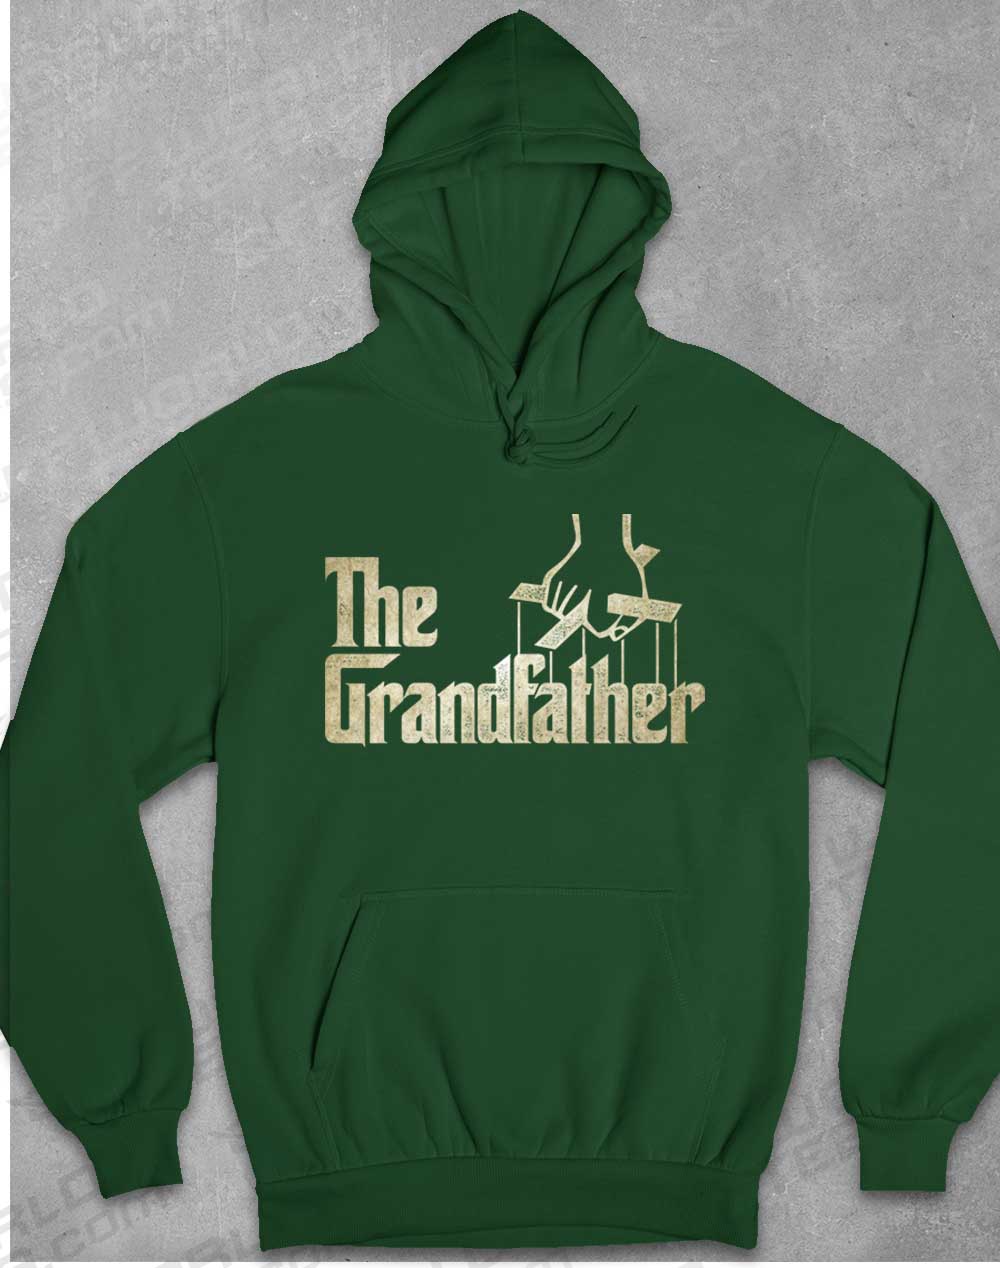 Bottle Green - The Grandfather Hoodie